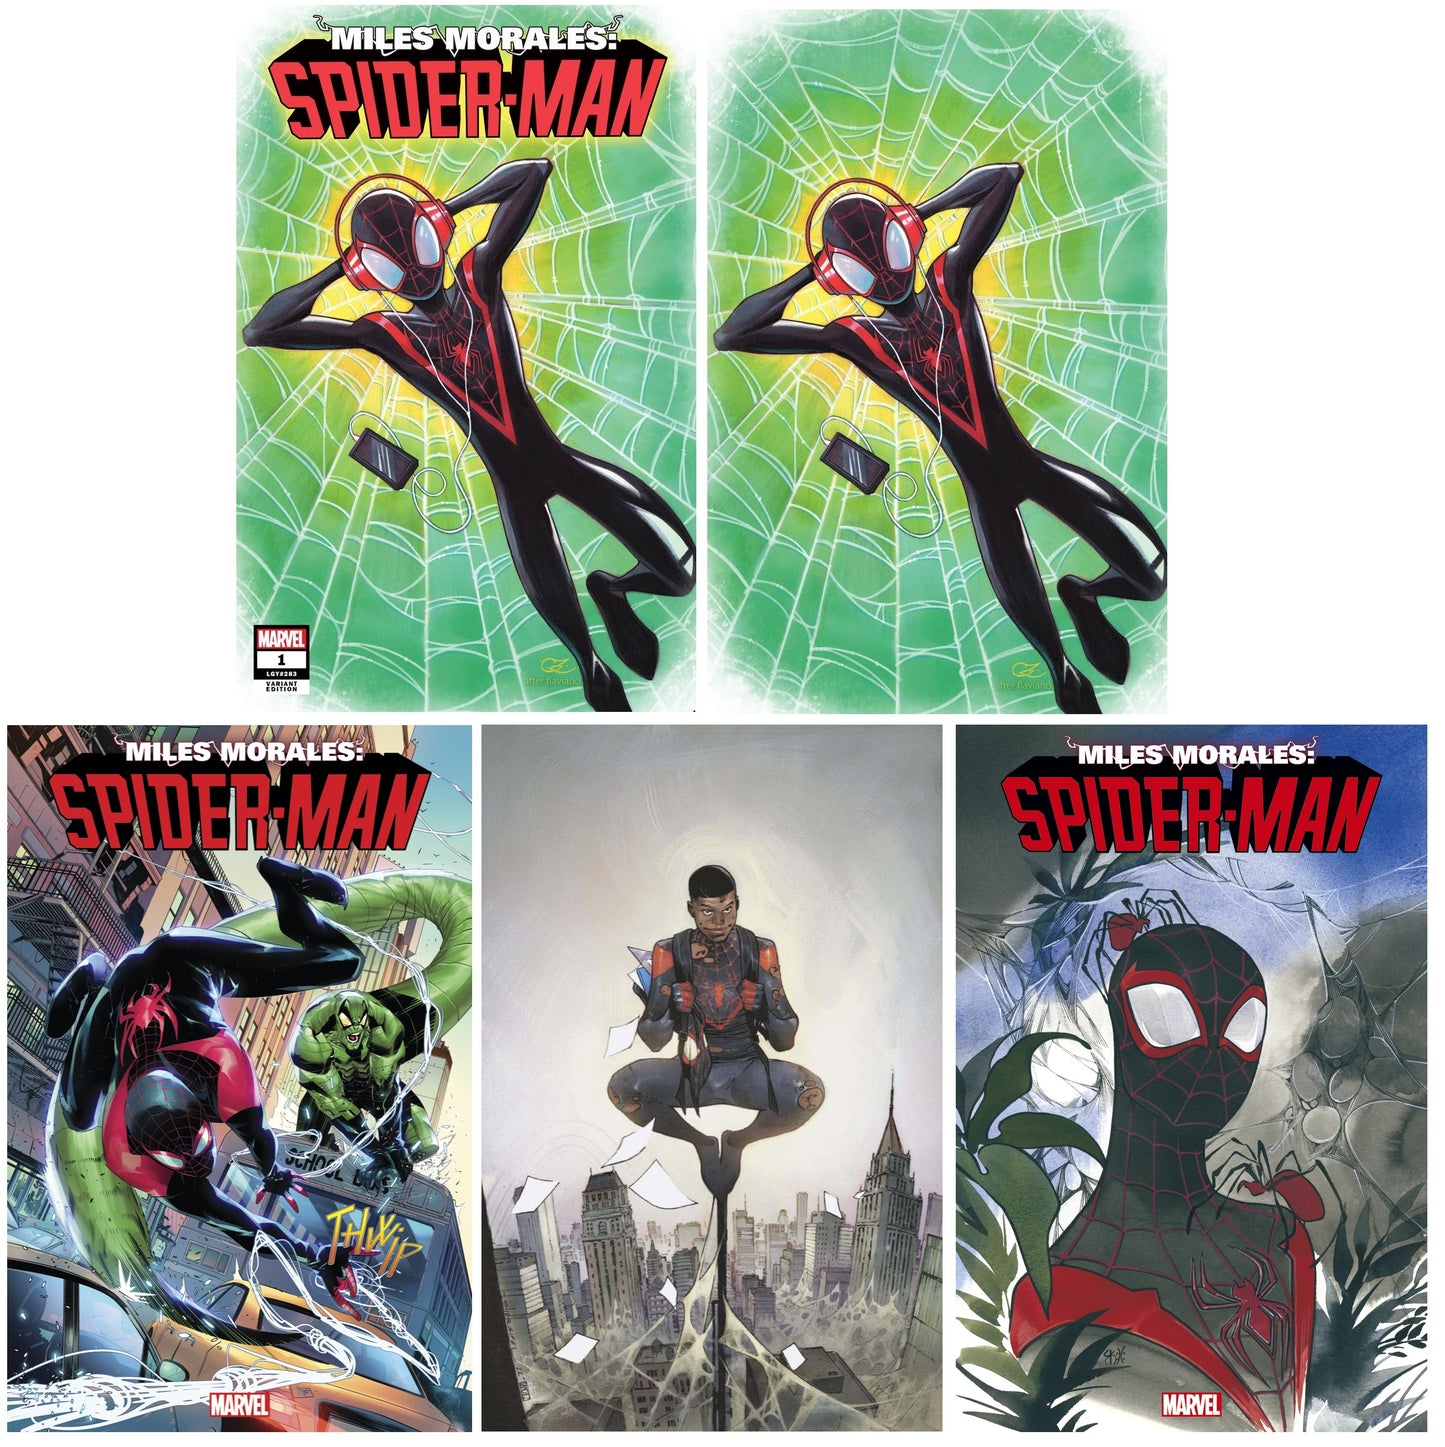 MILES MORALES SPIDER-MAN #1 CHRISSIE ZULLO TRADE/VIRGIN VARIANT SET LIMITED TO 500 SETS WITH NUMBERED COA + 1:25, 1:100 & 1:200 VARIANTS